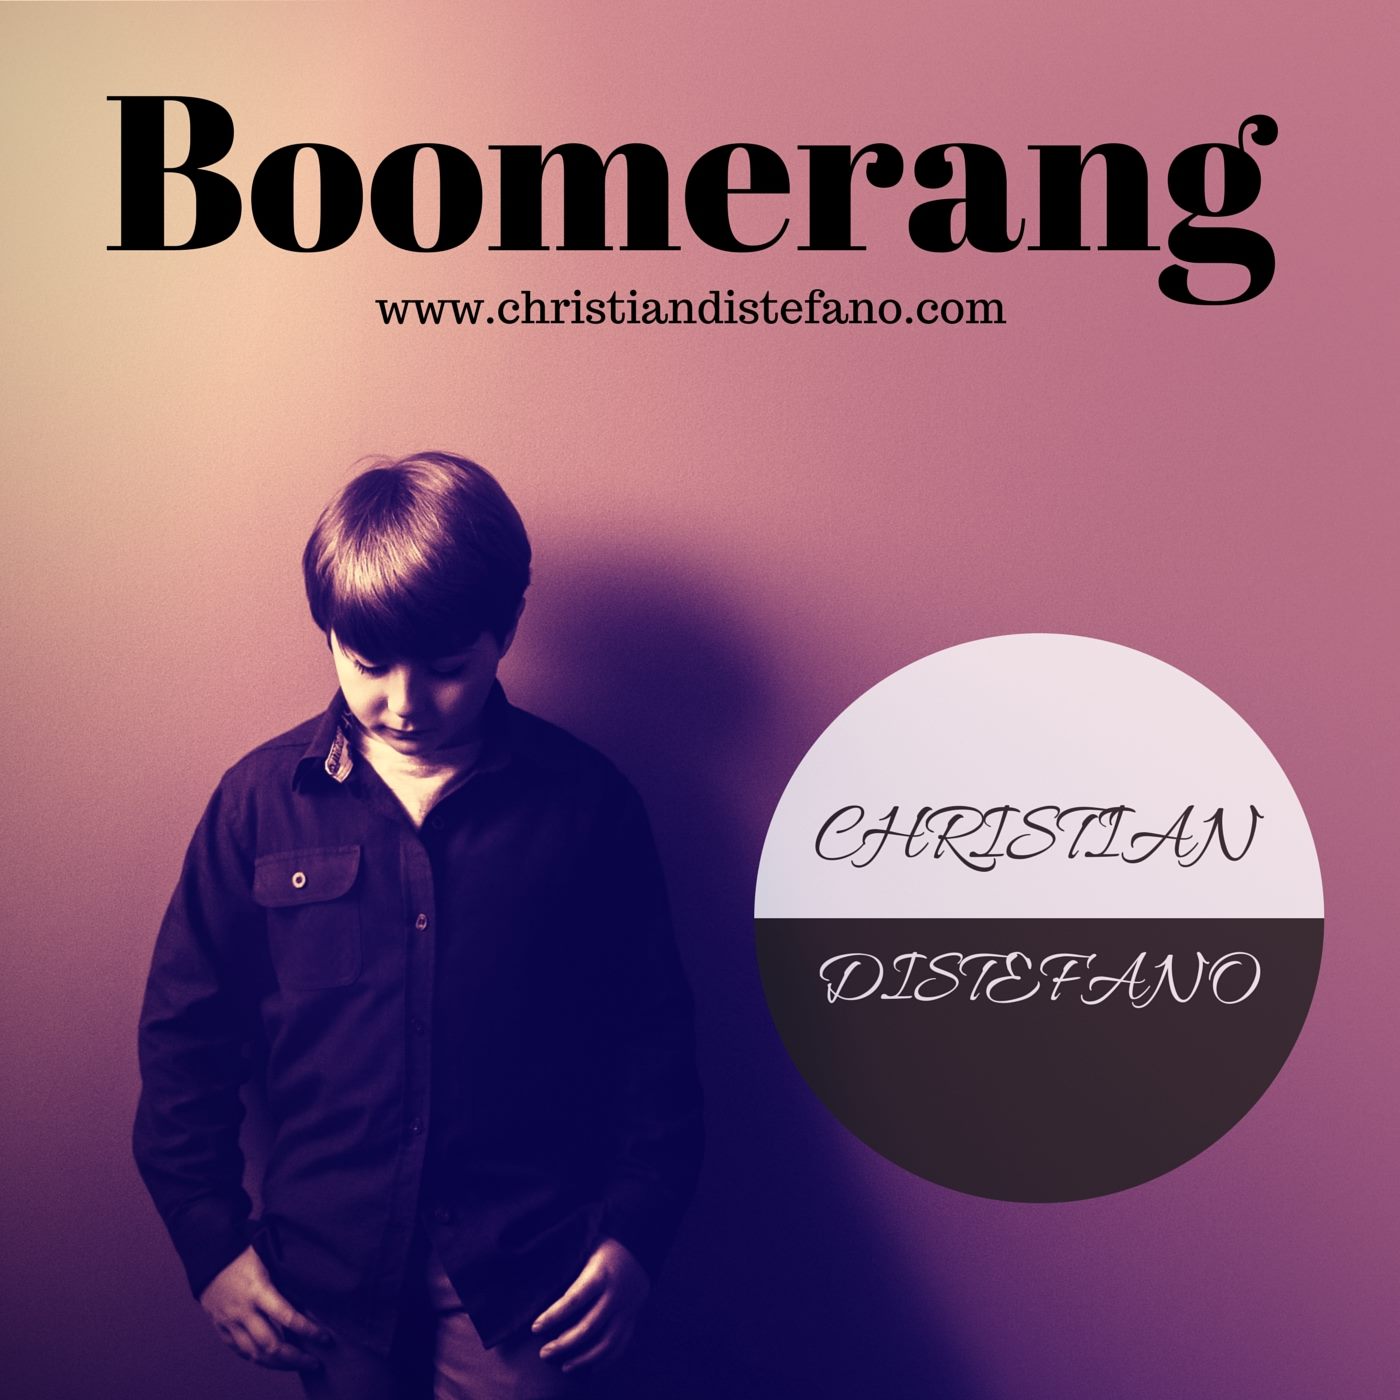 BOOMERANG CD COVER PHOTO WATCH VIDEO ON YOUTUBE HERE https://youtu.be/HPIpPjp-hnI